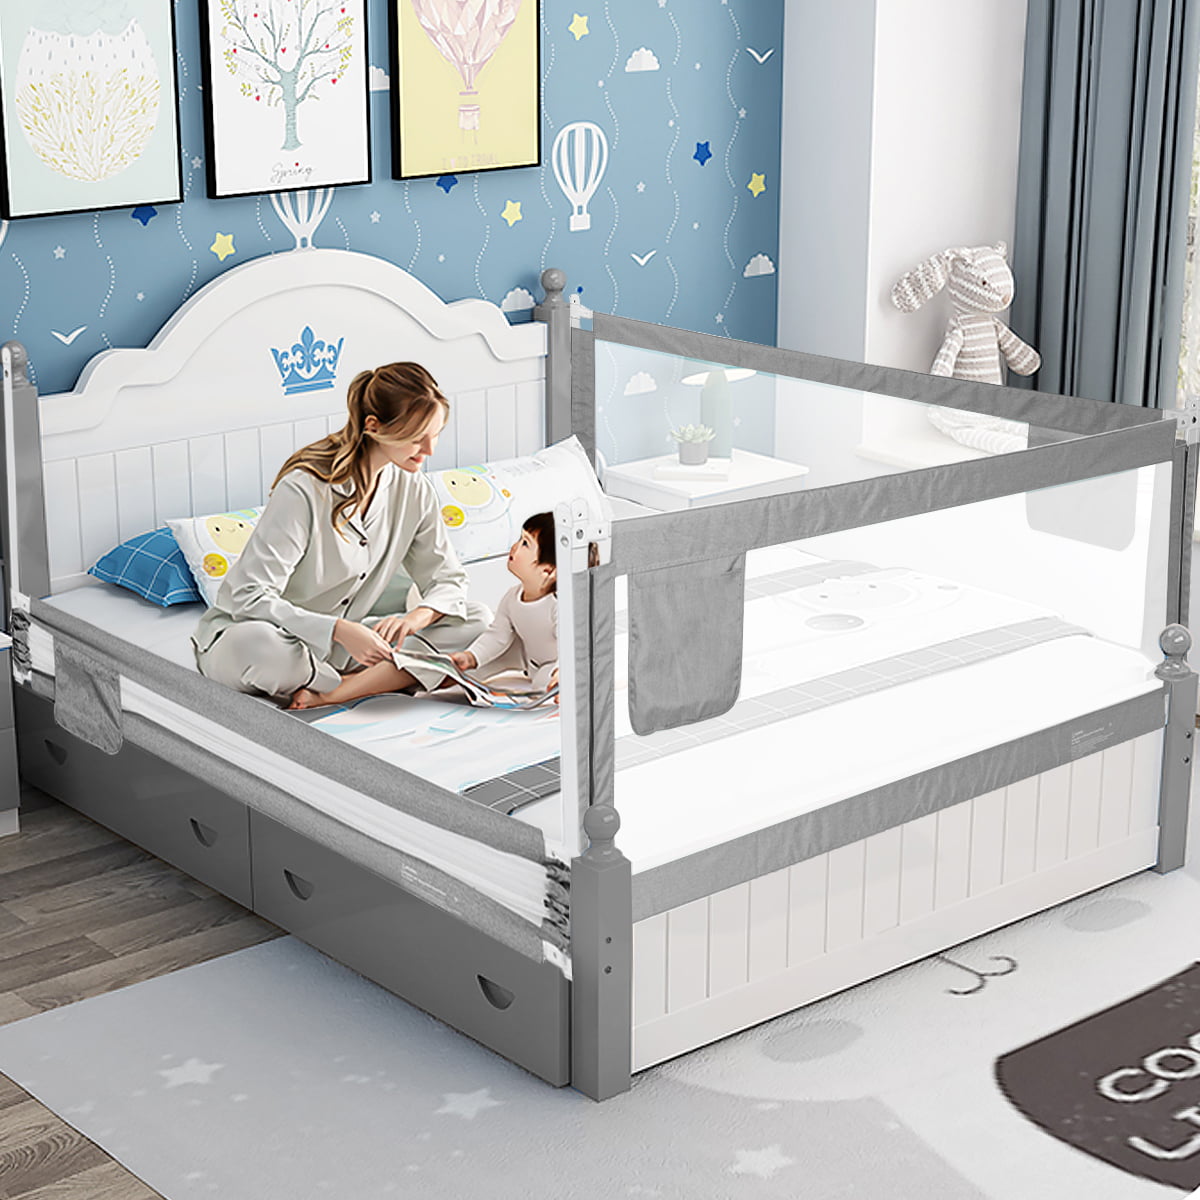 Beige Upgraded 2 Pack 70 Inches Bed Rail for Toddlers Fold Down Safety Baby Bed Guard Swing Down Bedrail for Convertible Crib Double Kids Twin Full Size Queen & King Mattress 